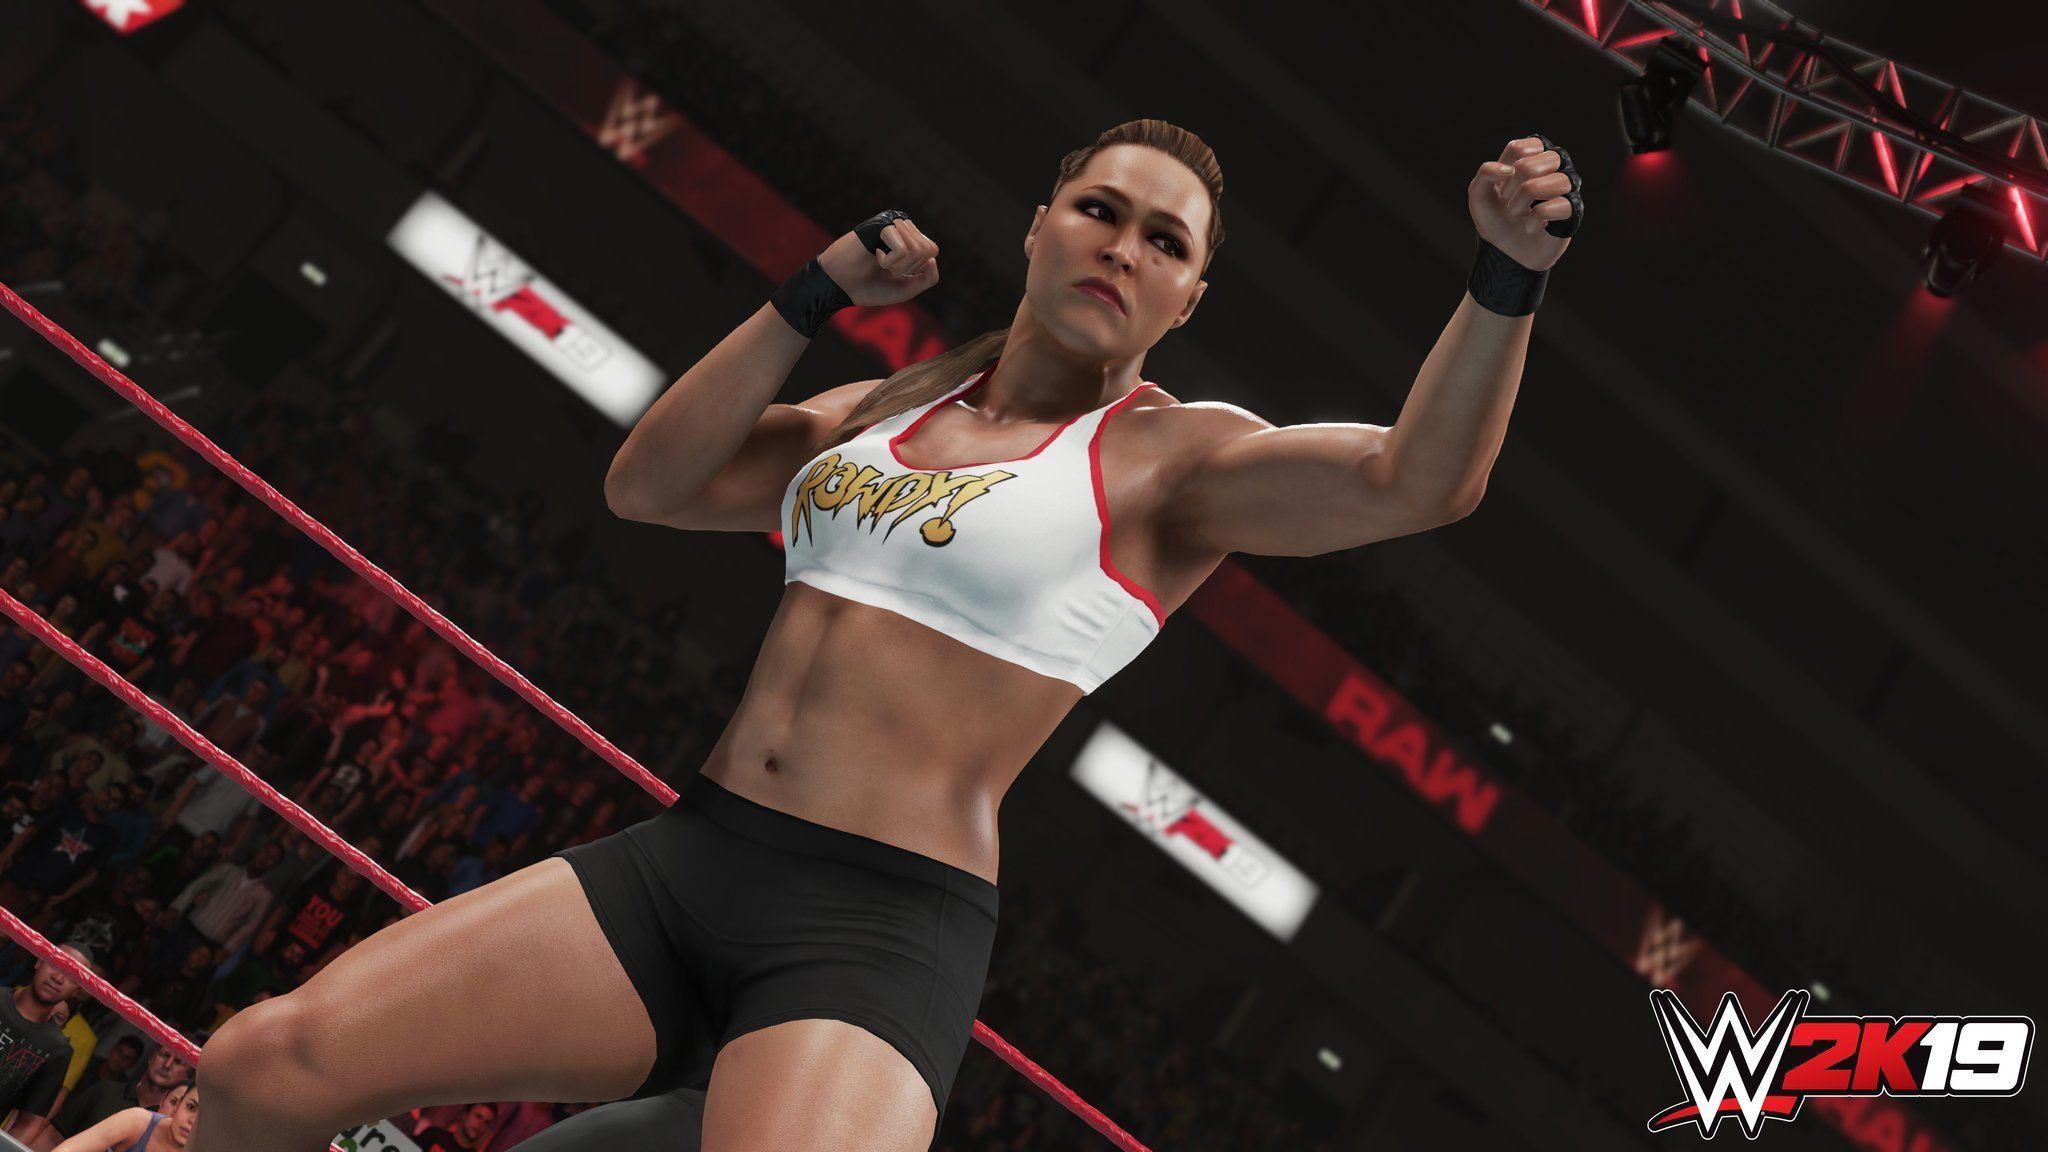 WWE 2K19 screenshots, image and picture